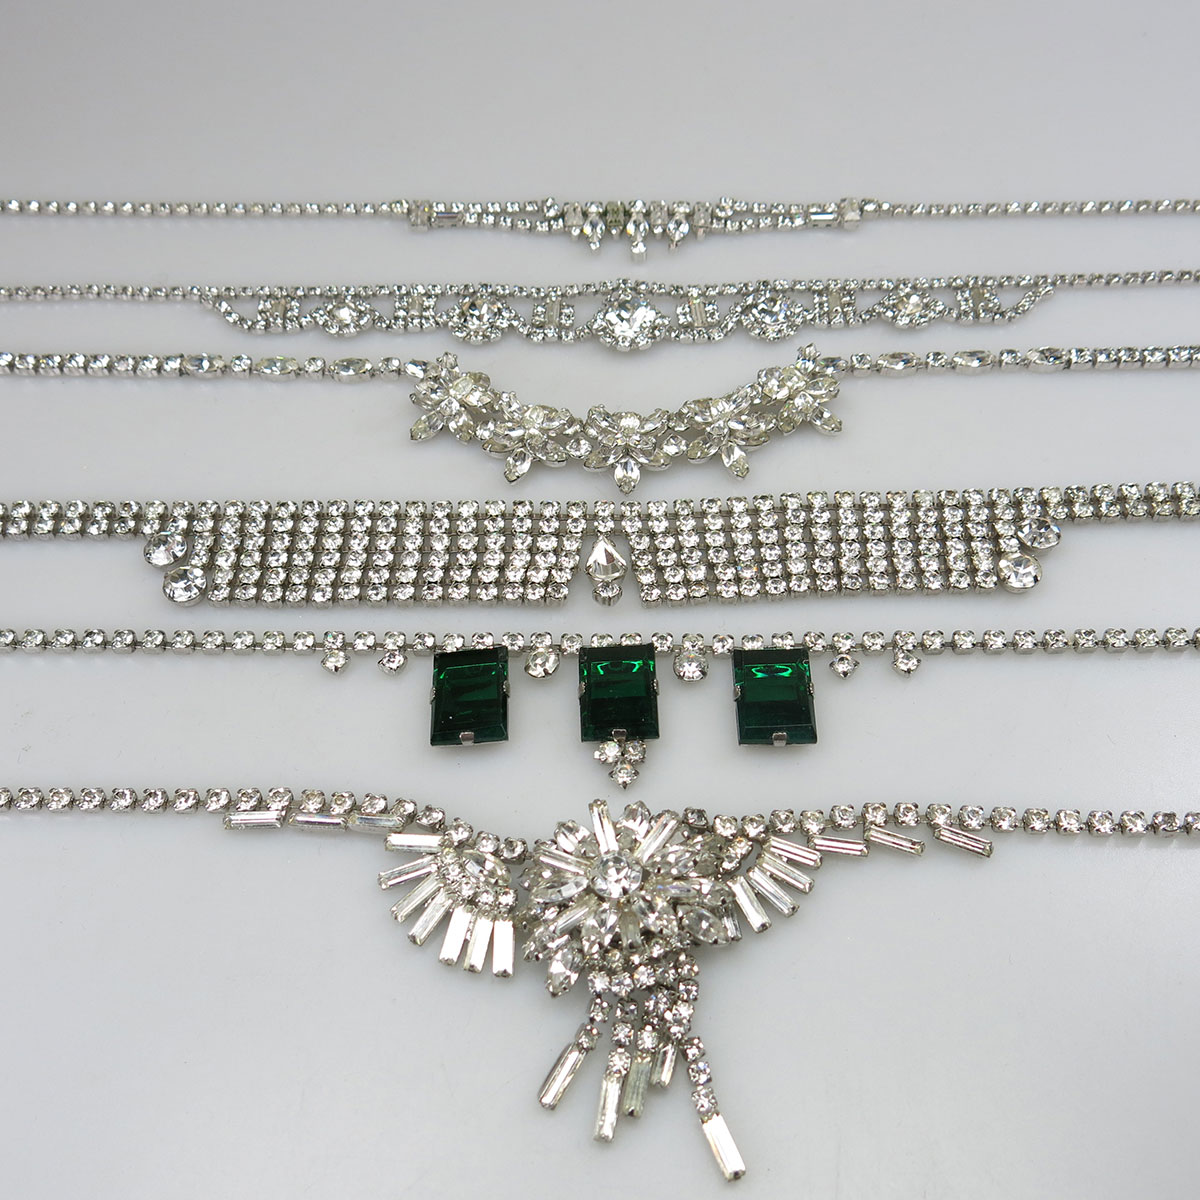 7 Various Clear Rhinestone Necklaces